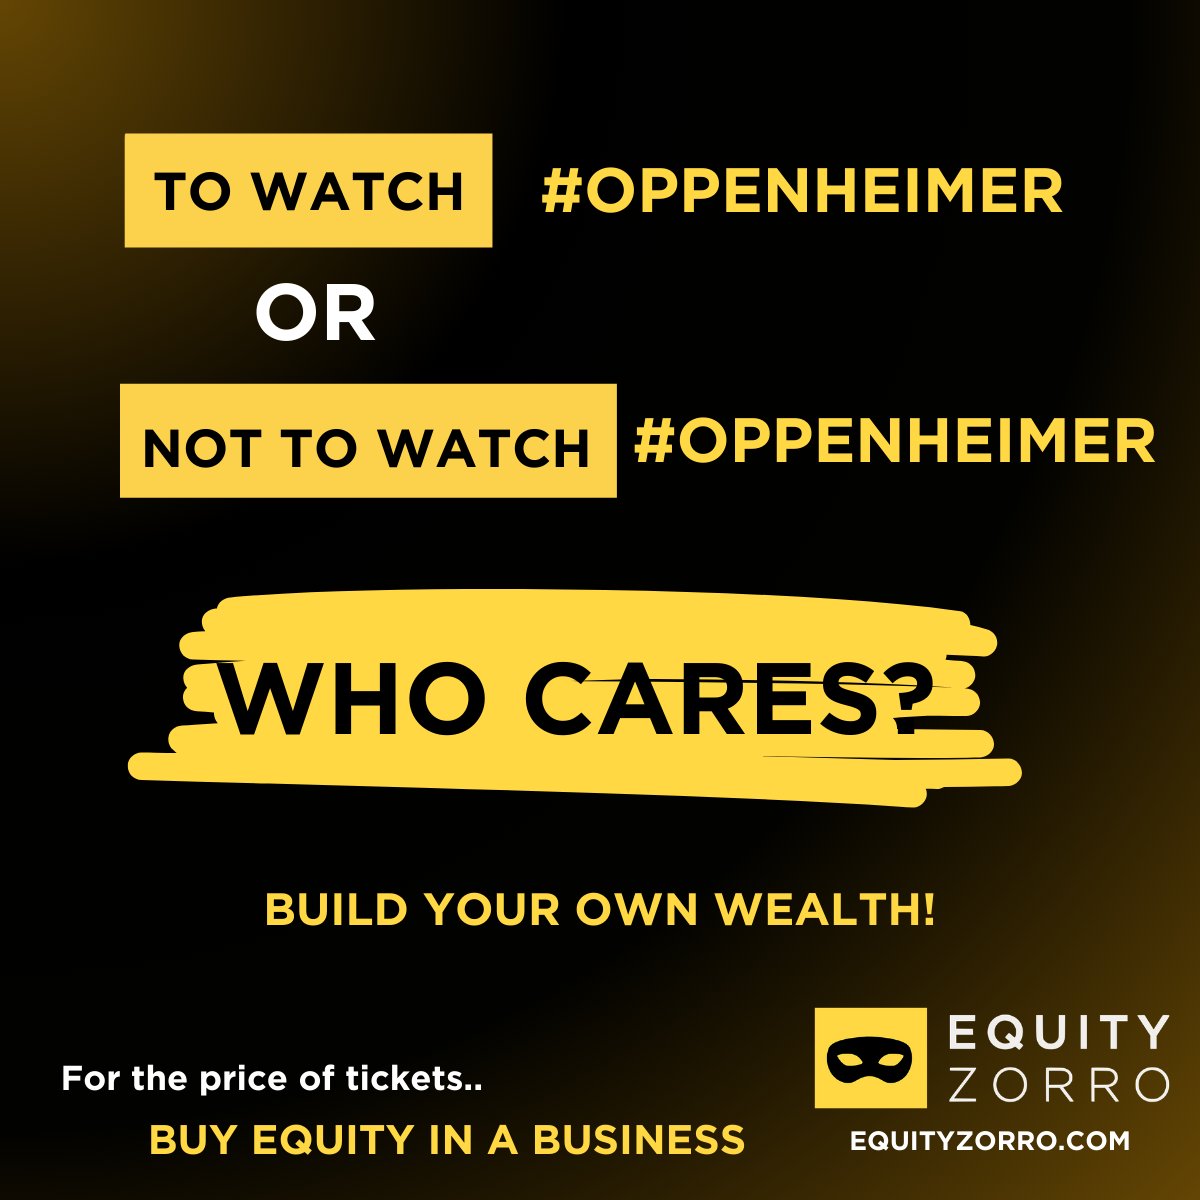 To watch #oppenheimer or not to watch #oppenheimer? WHO CARES? 🤷‍♀️Wouldn't you rather put time and effort to build your own #wealth?📈💰 Let's Grow your wealth together. 🤝equityzorro.com/sign-up/
#motivation #hedgefundmanager #wealthmanagement